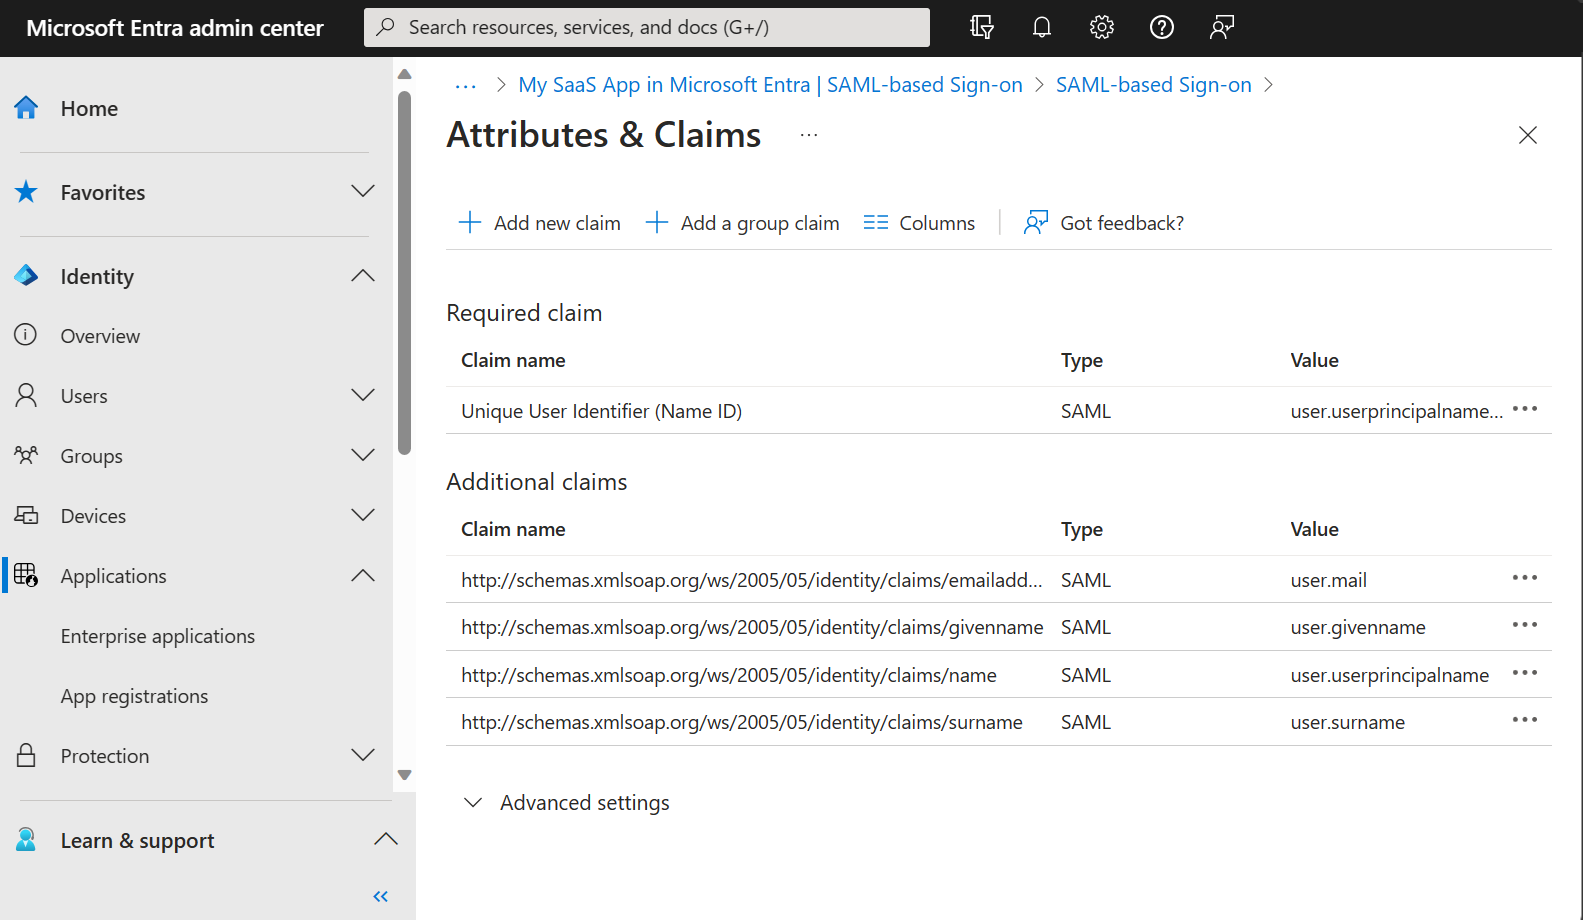 Screenshot shows the page to edit User Attributes and Claims.